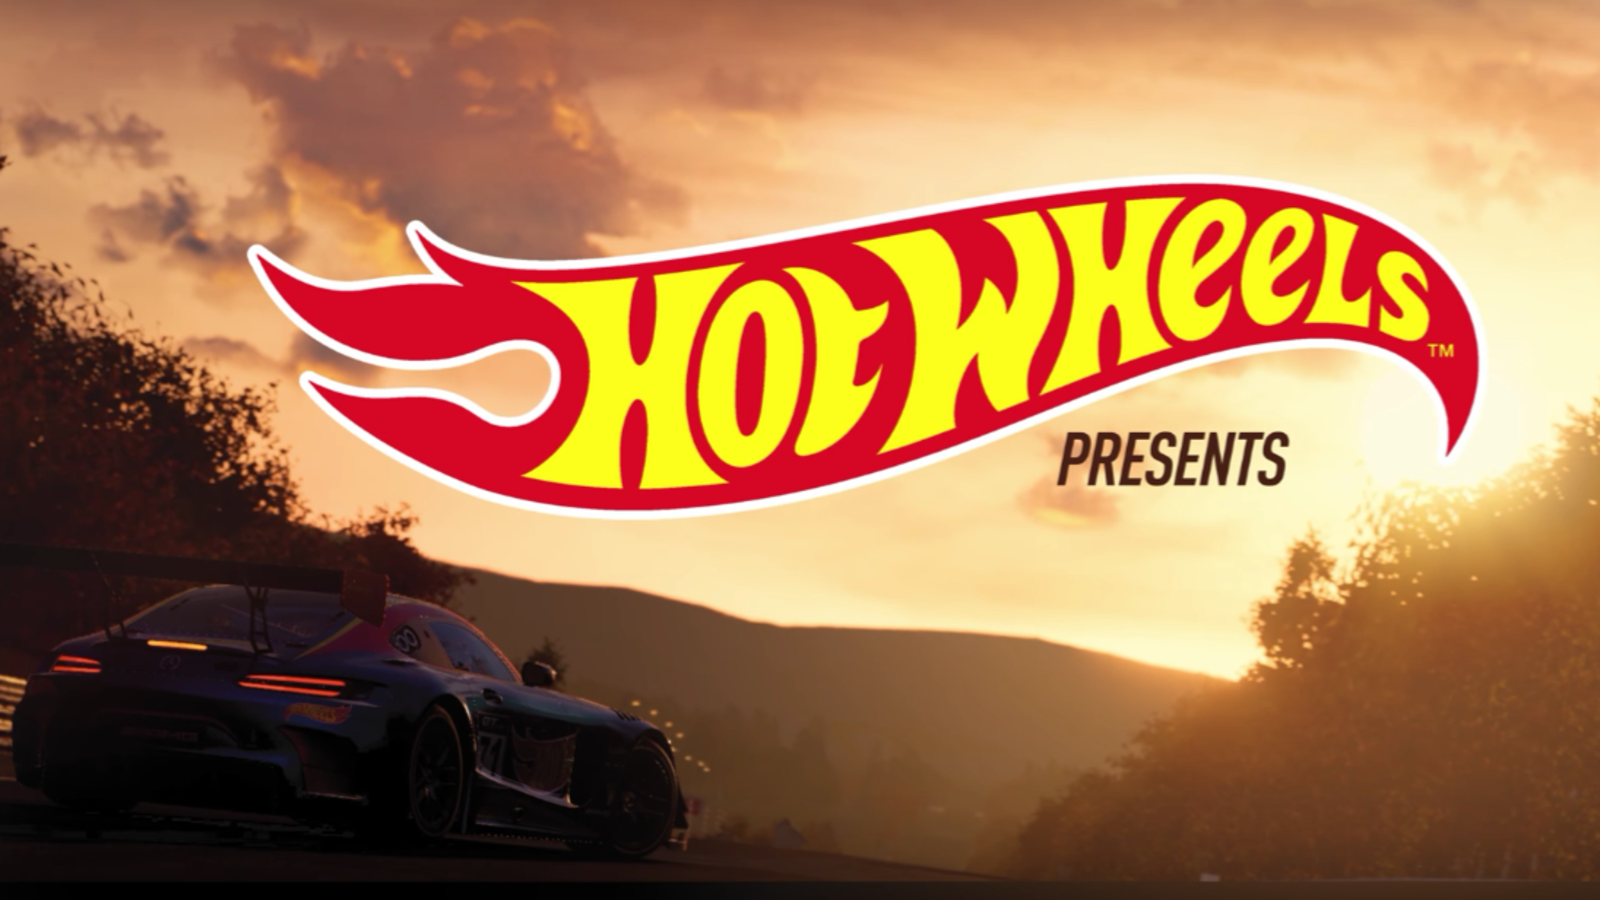 Illustration for article titled Do you know why some Hot Wheels have Project CARS 2 deco?